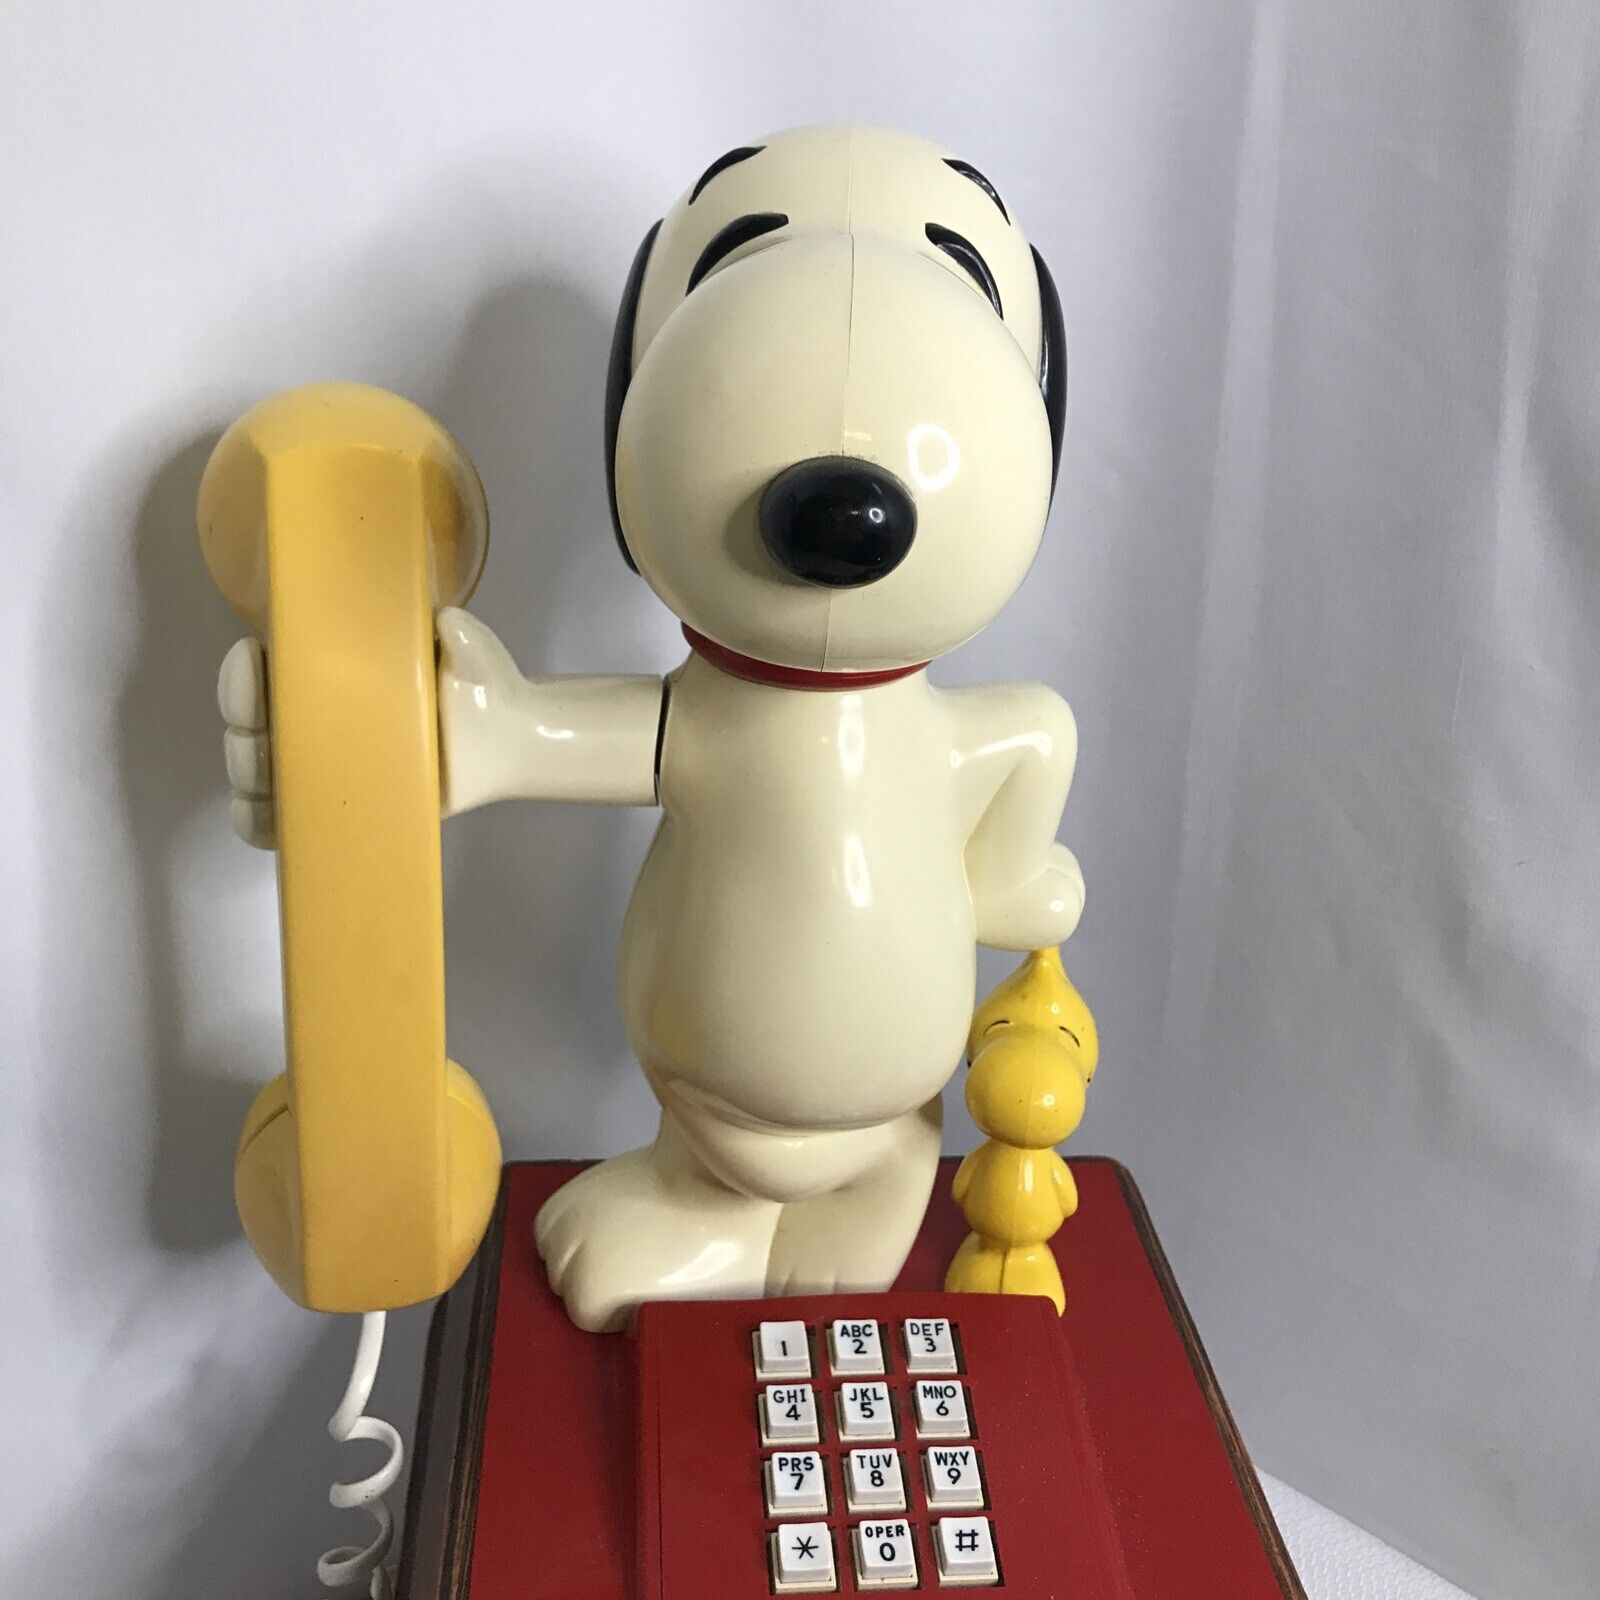 Snoopy & Woodstock Touch Tone Landline Phone Vintage 1976 Tested NO Ringer